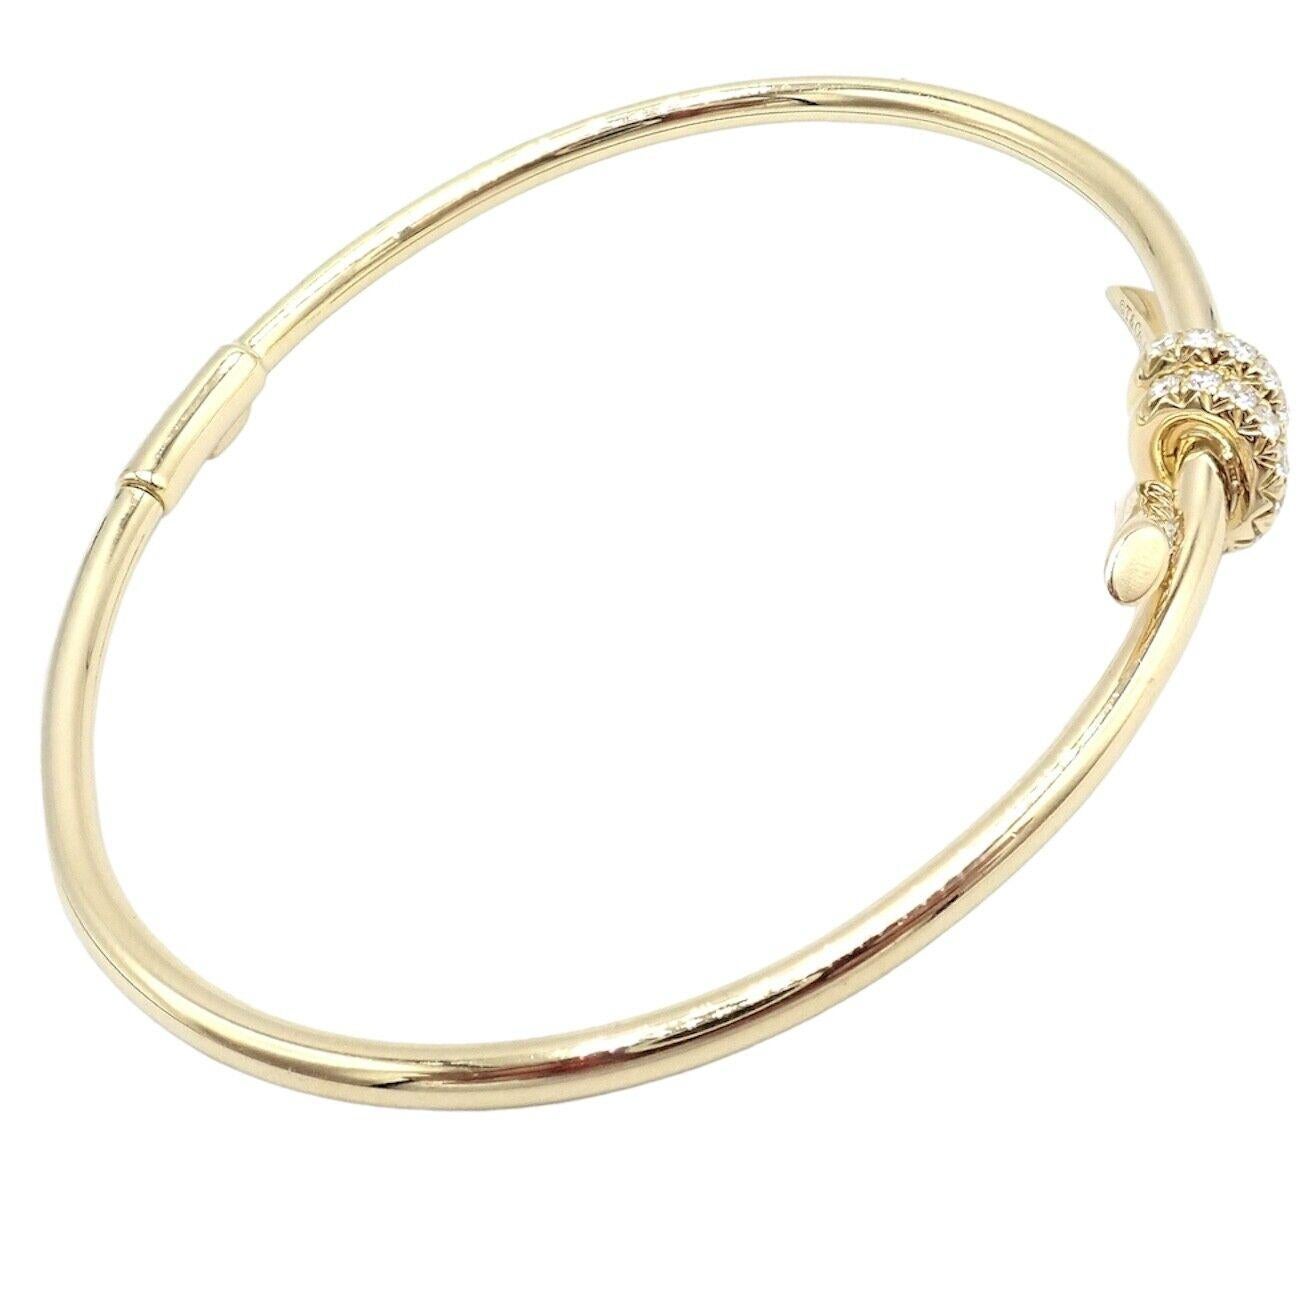 18k Yellow Gold Diamond Knot Bangle Bracelet by Tiffany & Co. 
With 28 Round Brilliant Cut Diamonds VS1 clarity, G color total weight approximately 0.34ct
Details: 
Weight: 9.3 grams
Length: 6.25